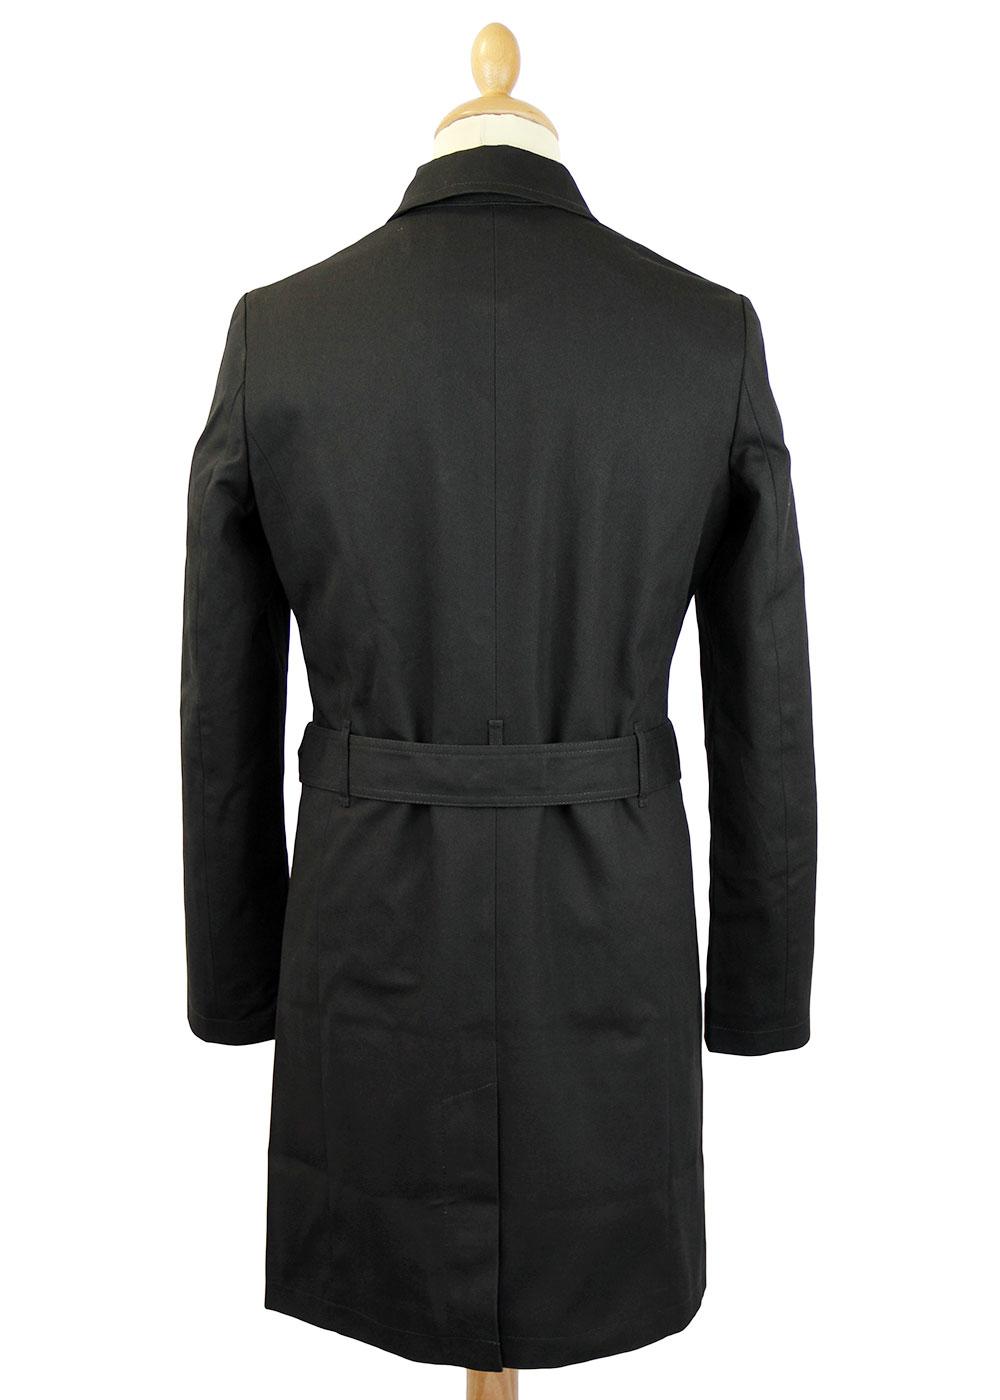 Ben Sherman Retro Mod Double Breasted Twill Trench Coat Black